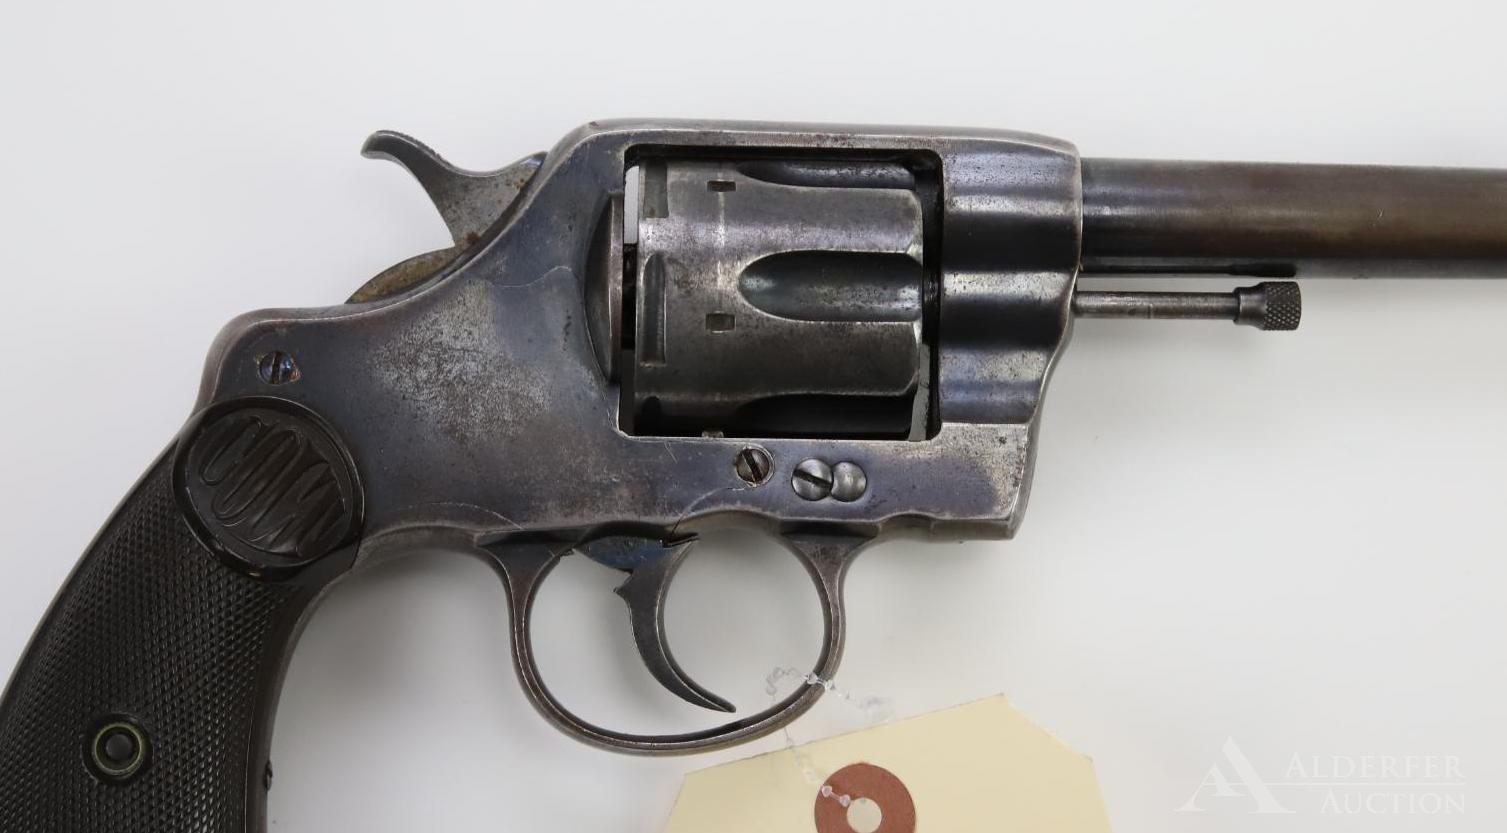 Colt New Army 1903 double action revolver